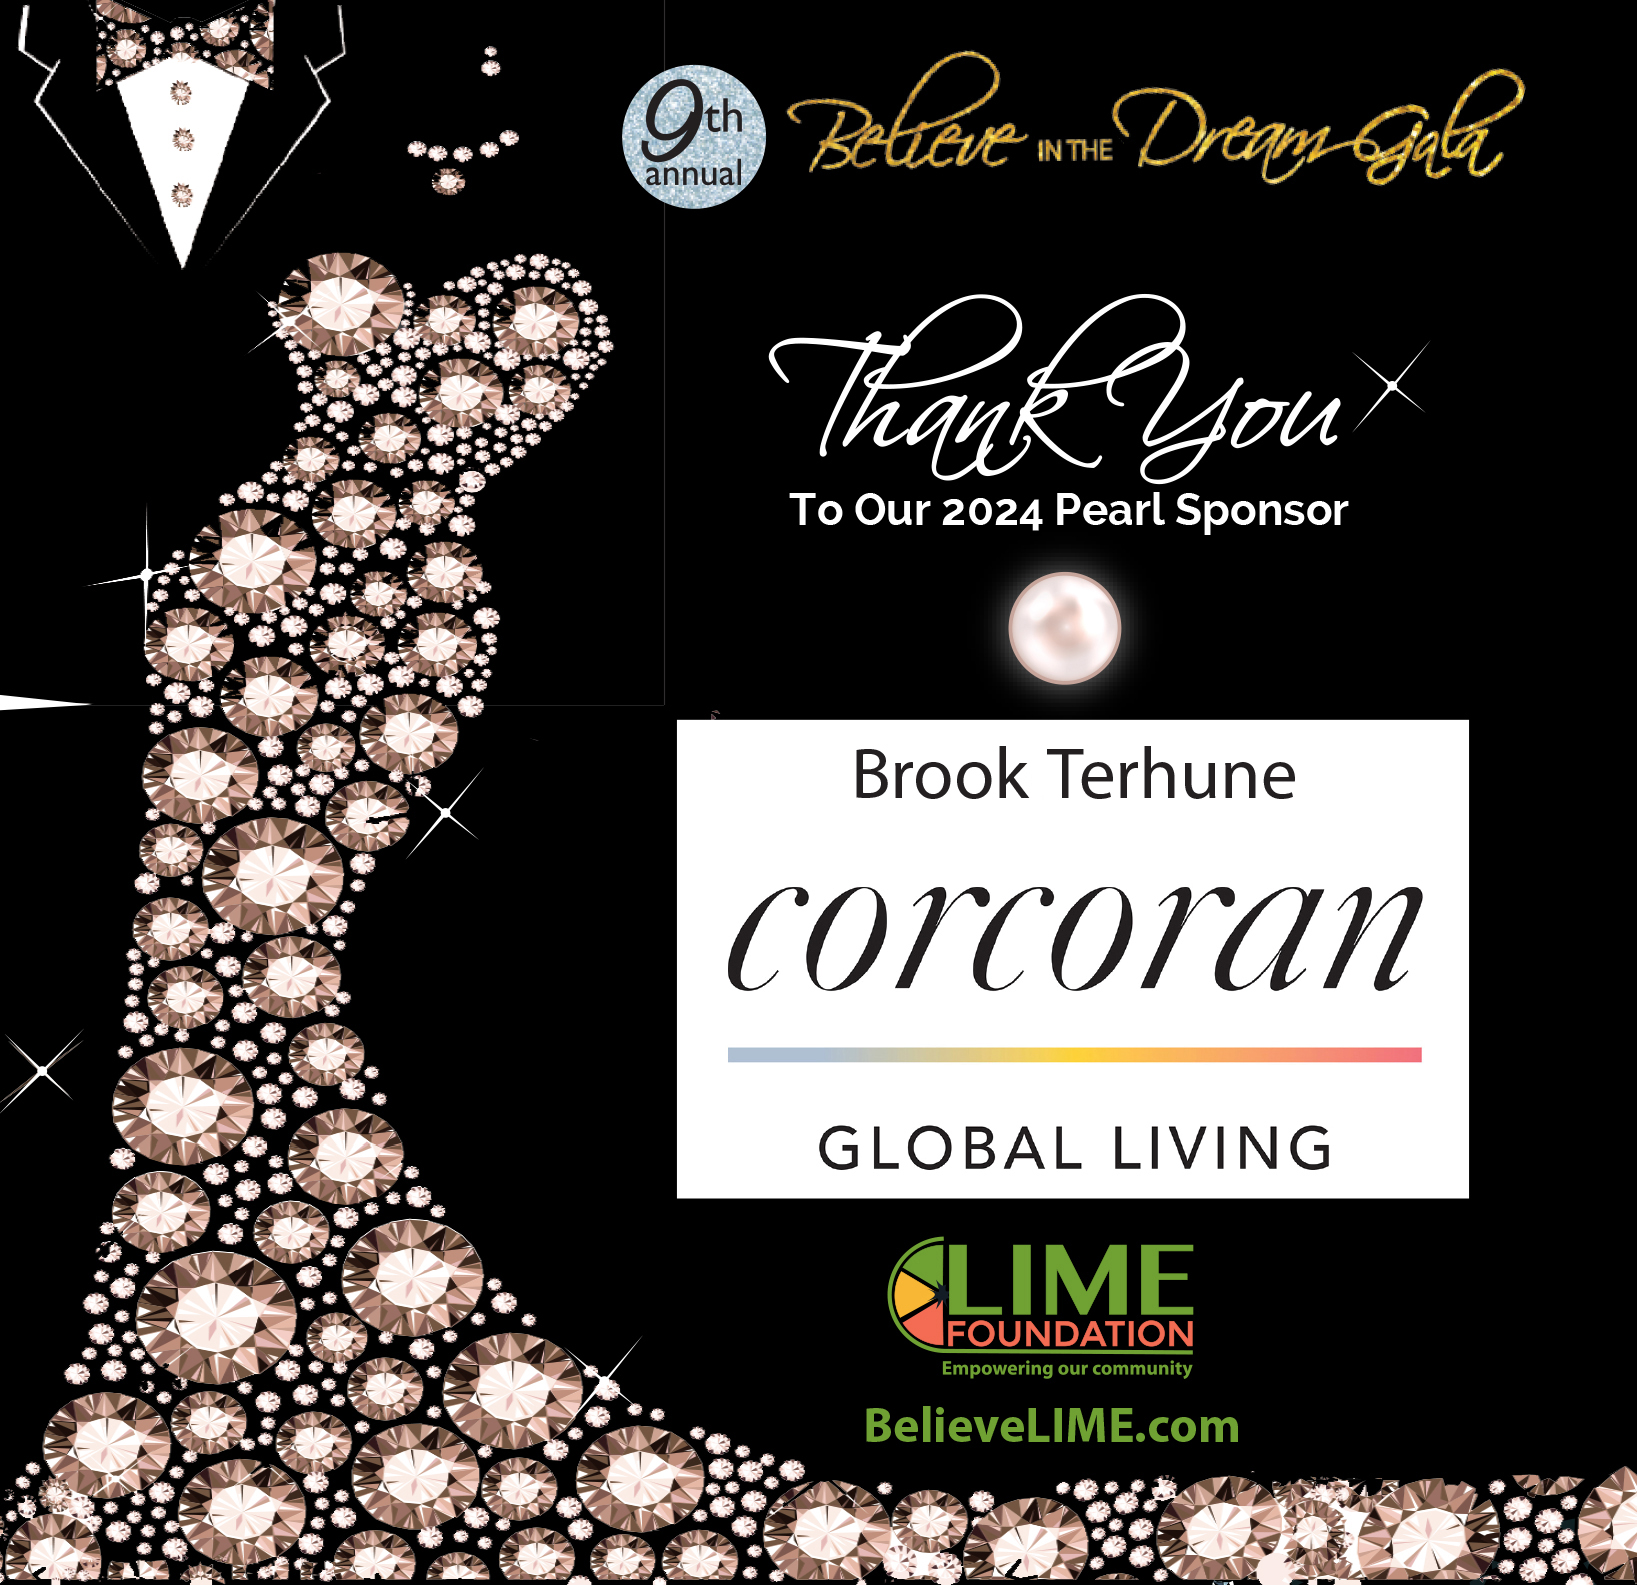 Black event flyer for the 2024 annual "Believe The Dream Gala" featuring a sparkling dress design, with sponsor names and logos, set against a dark starry background.